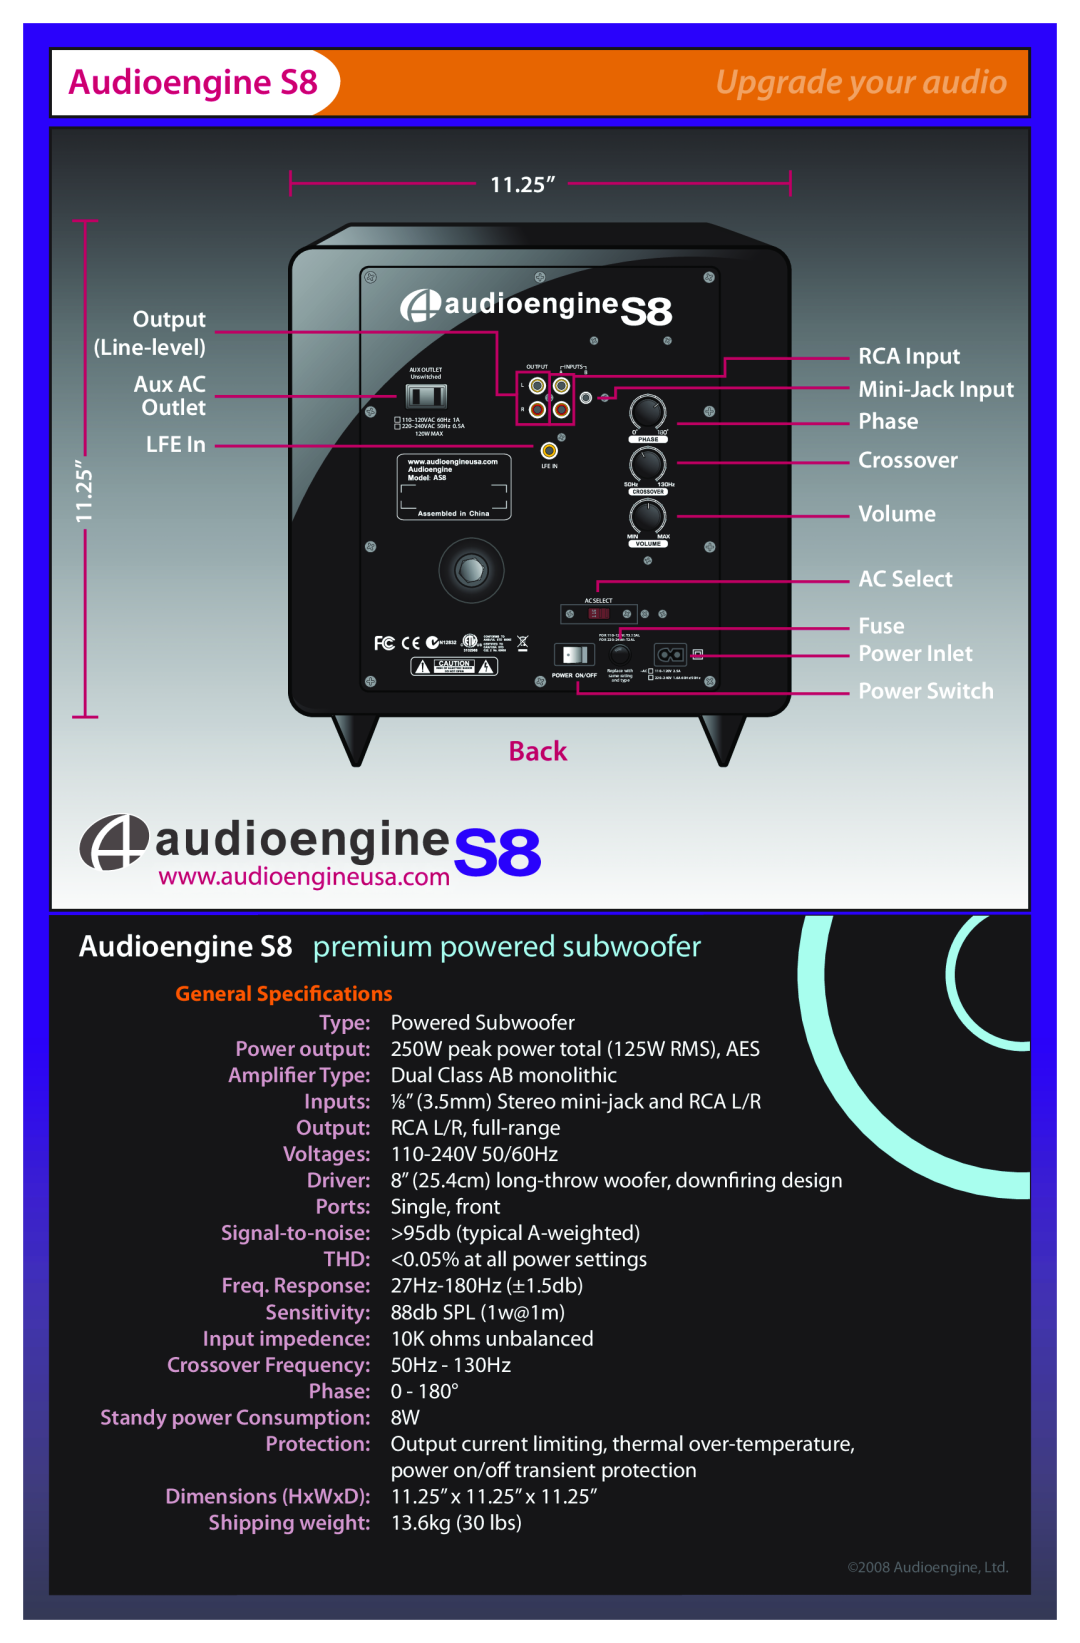 AudioEngine AS8 manual Upgrade your audio, Audioengine S8 premium powered subwoofer, Back, Aux AC Outlet LFE In, 11.25” 